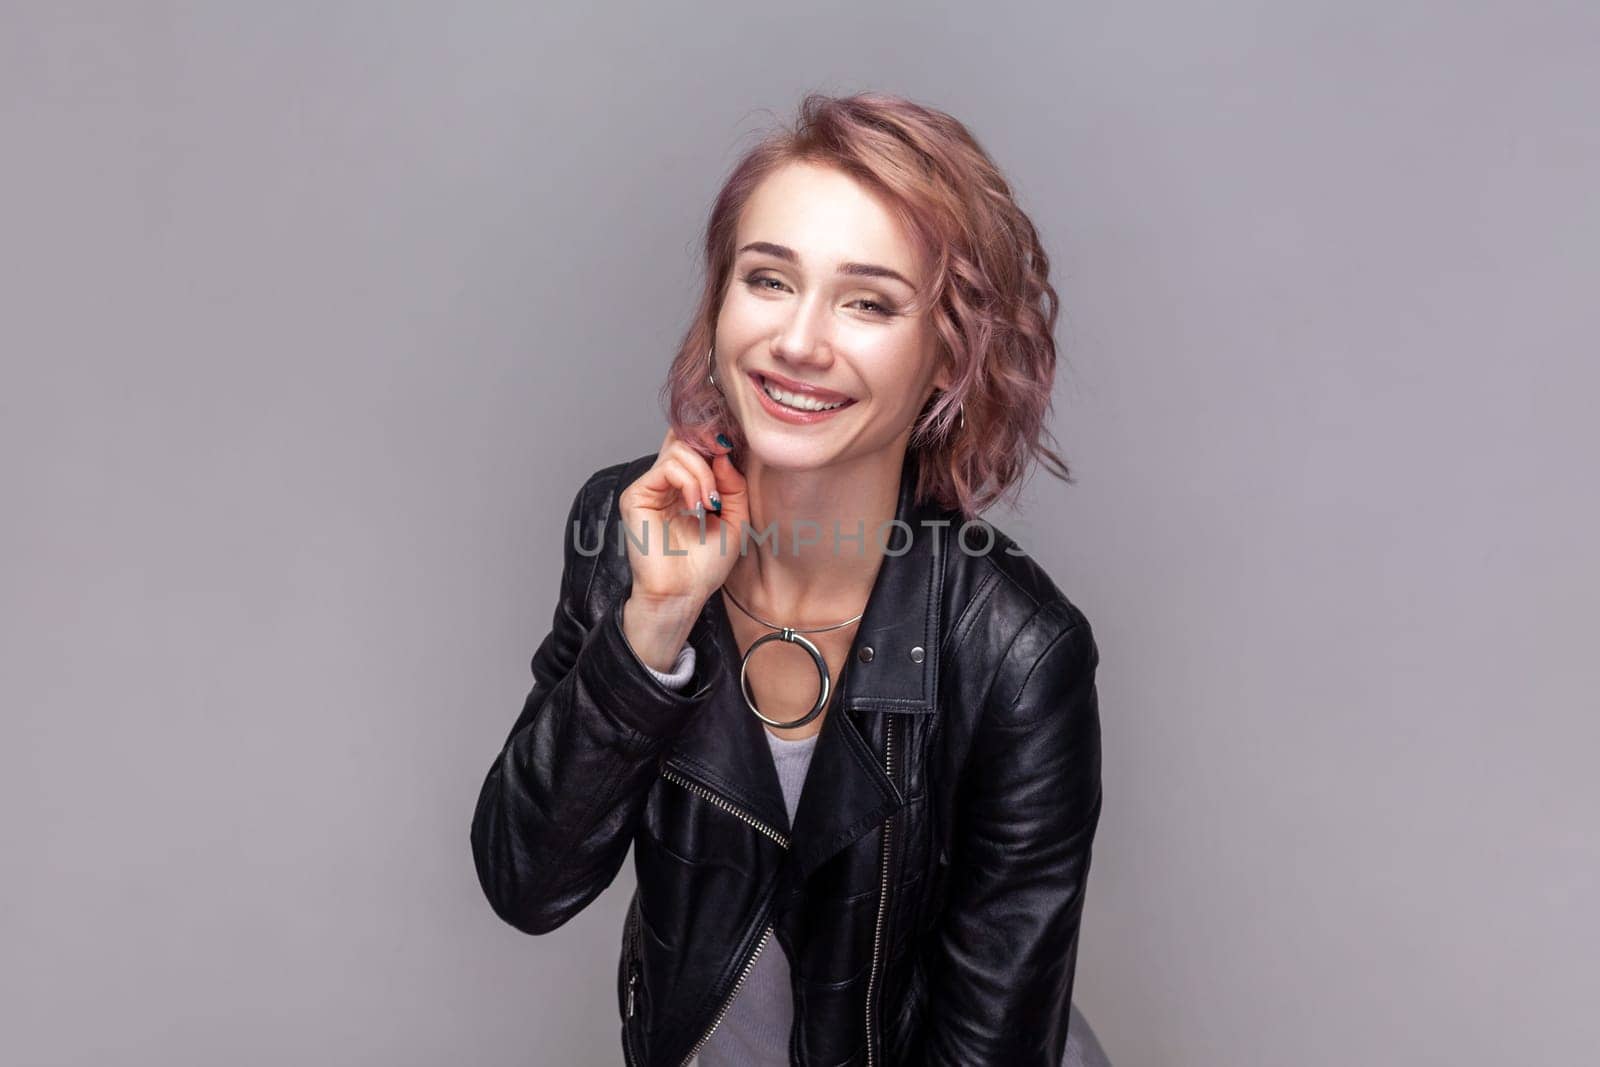 Portrait of charming beautiful adorable woman with short hairstyle standing looking at camera with toothy smile, wearing black leather jacket. Indoor studio shot isolated on grey background.